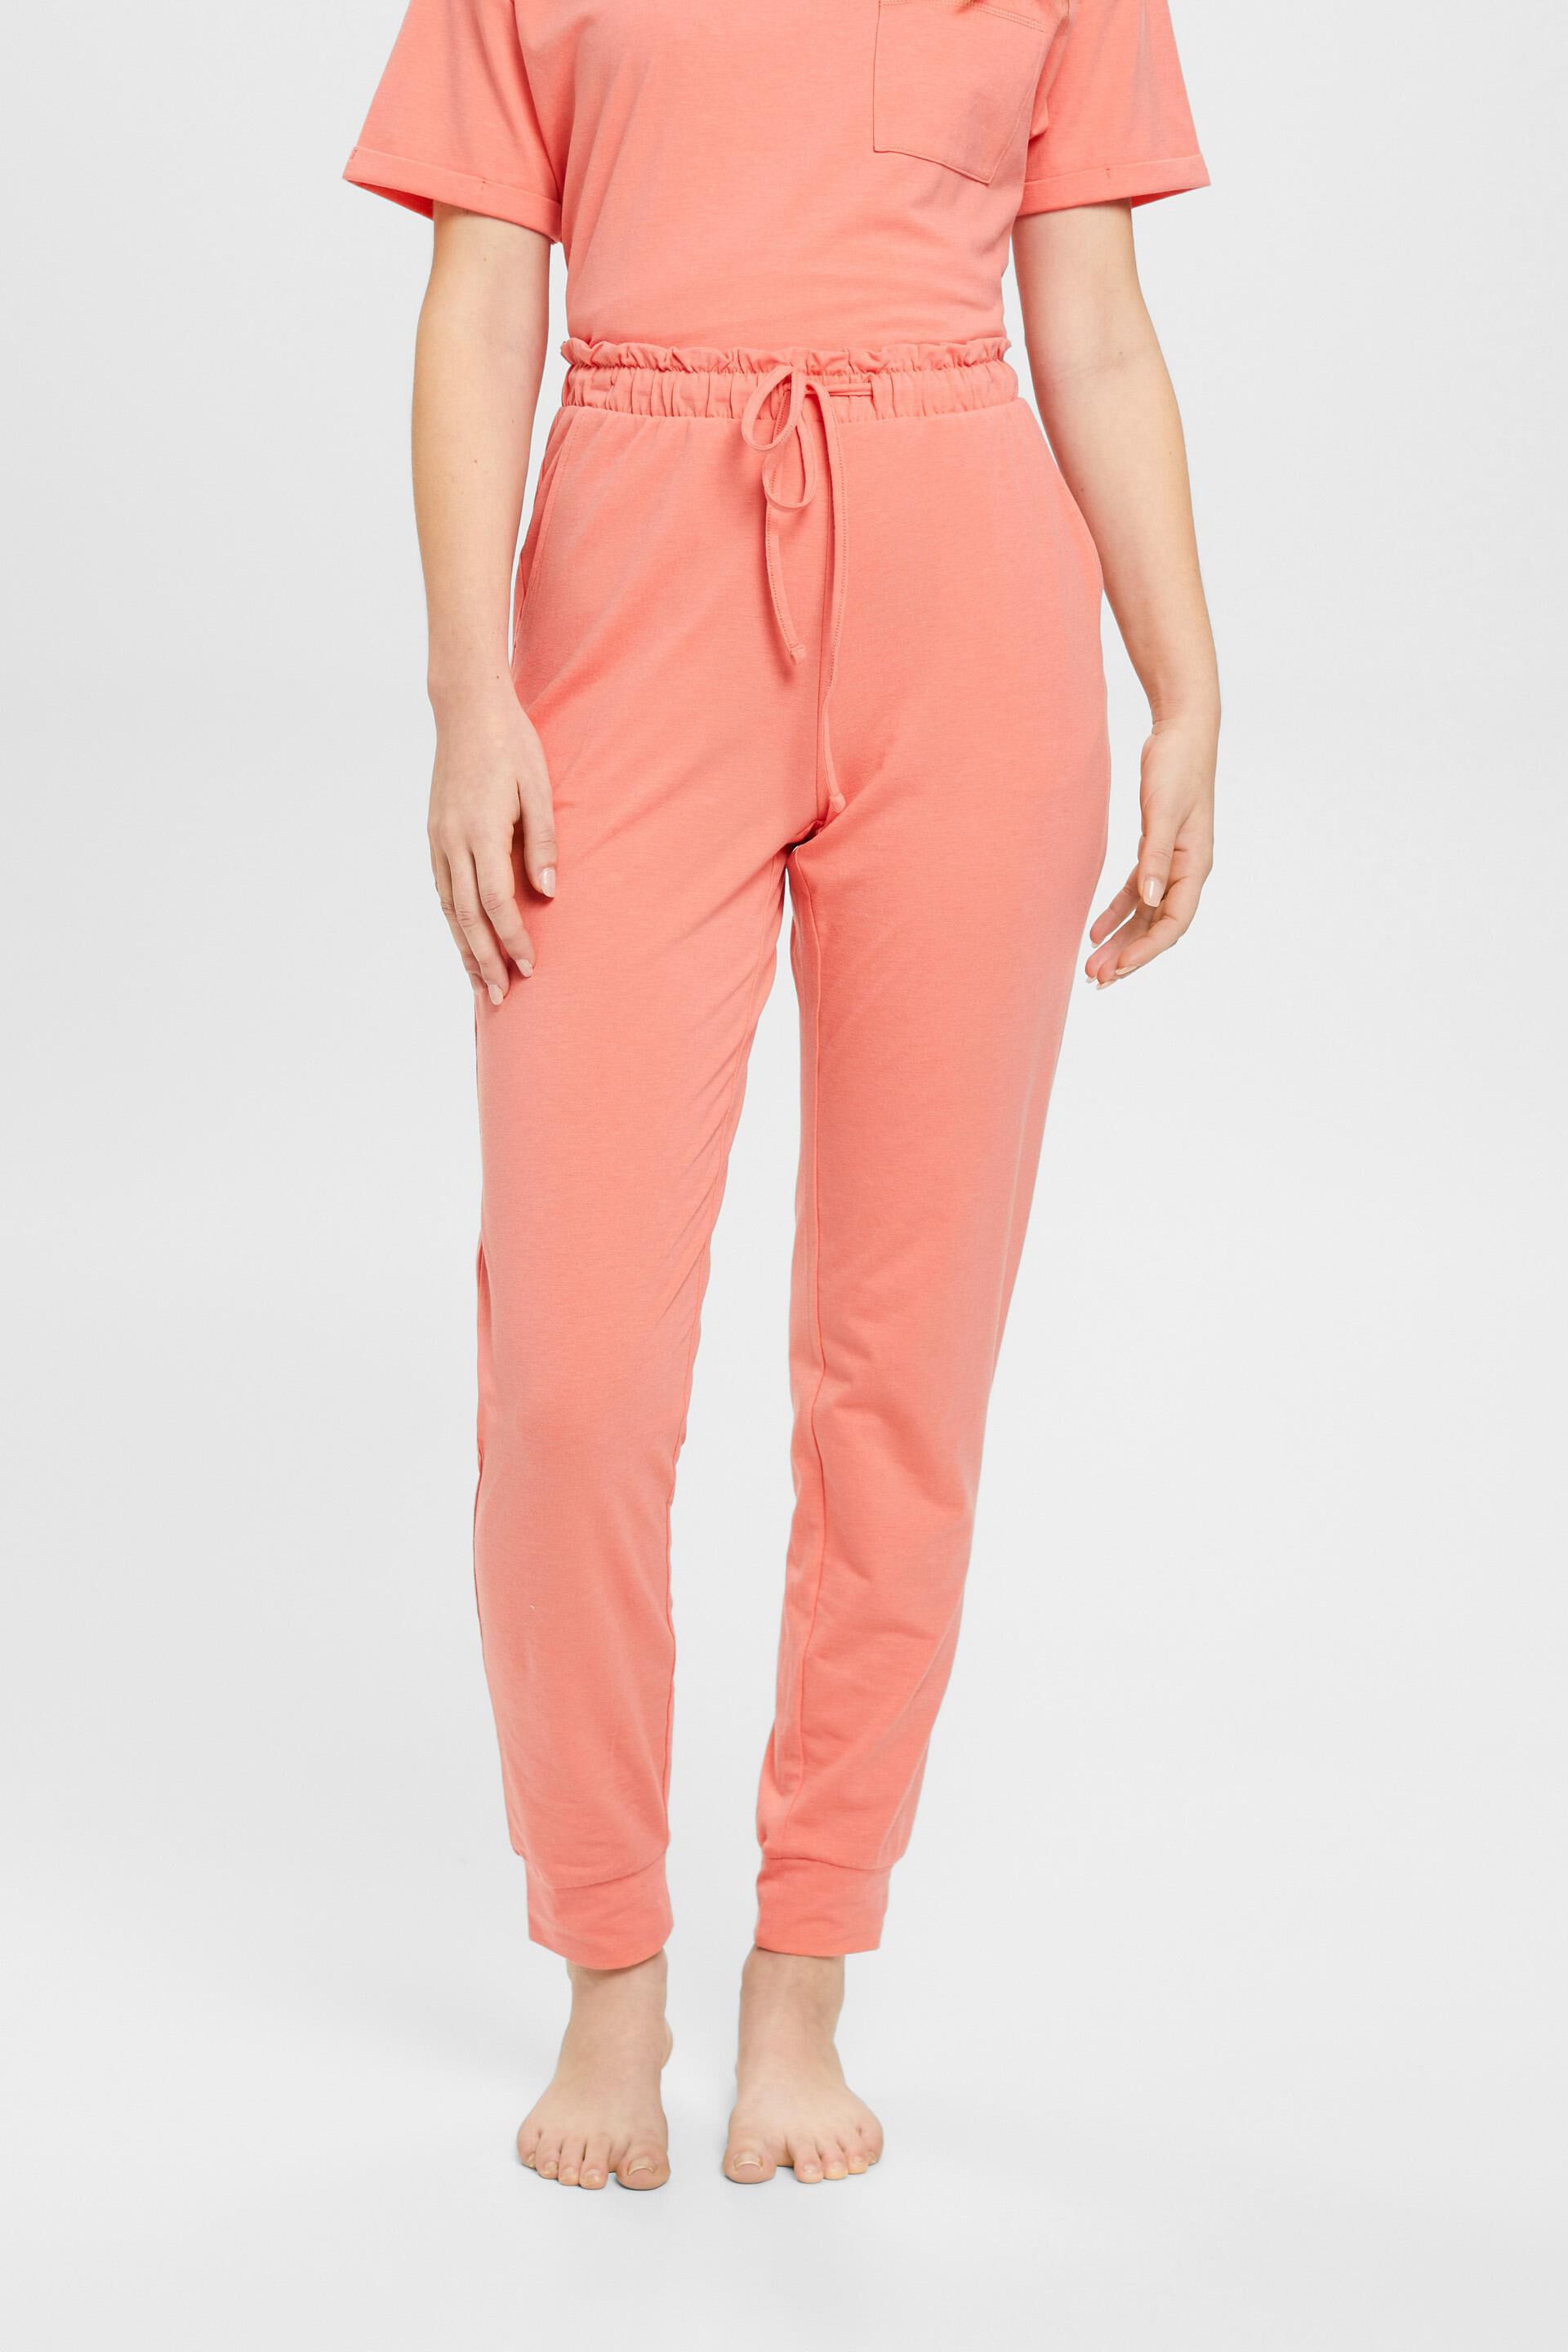 Esprit waistband elasticated trousers with Jersey